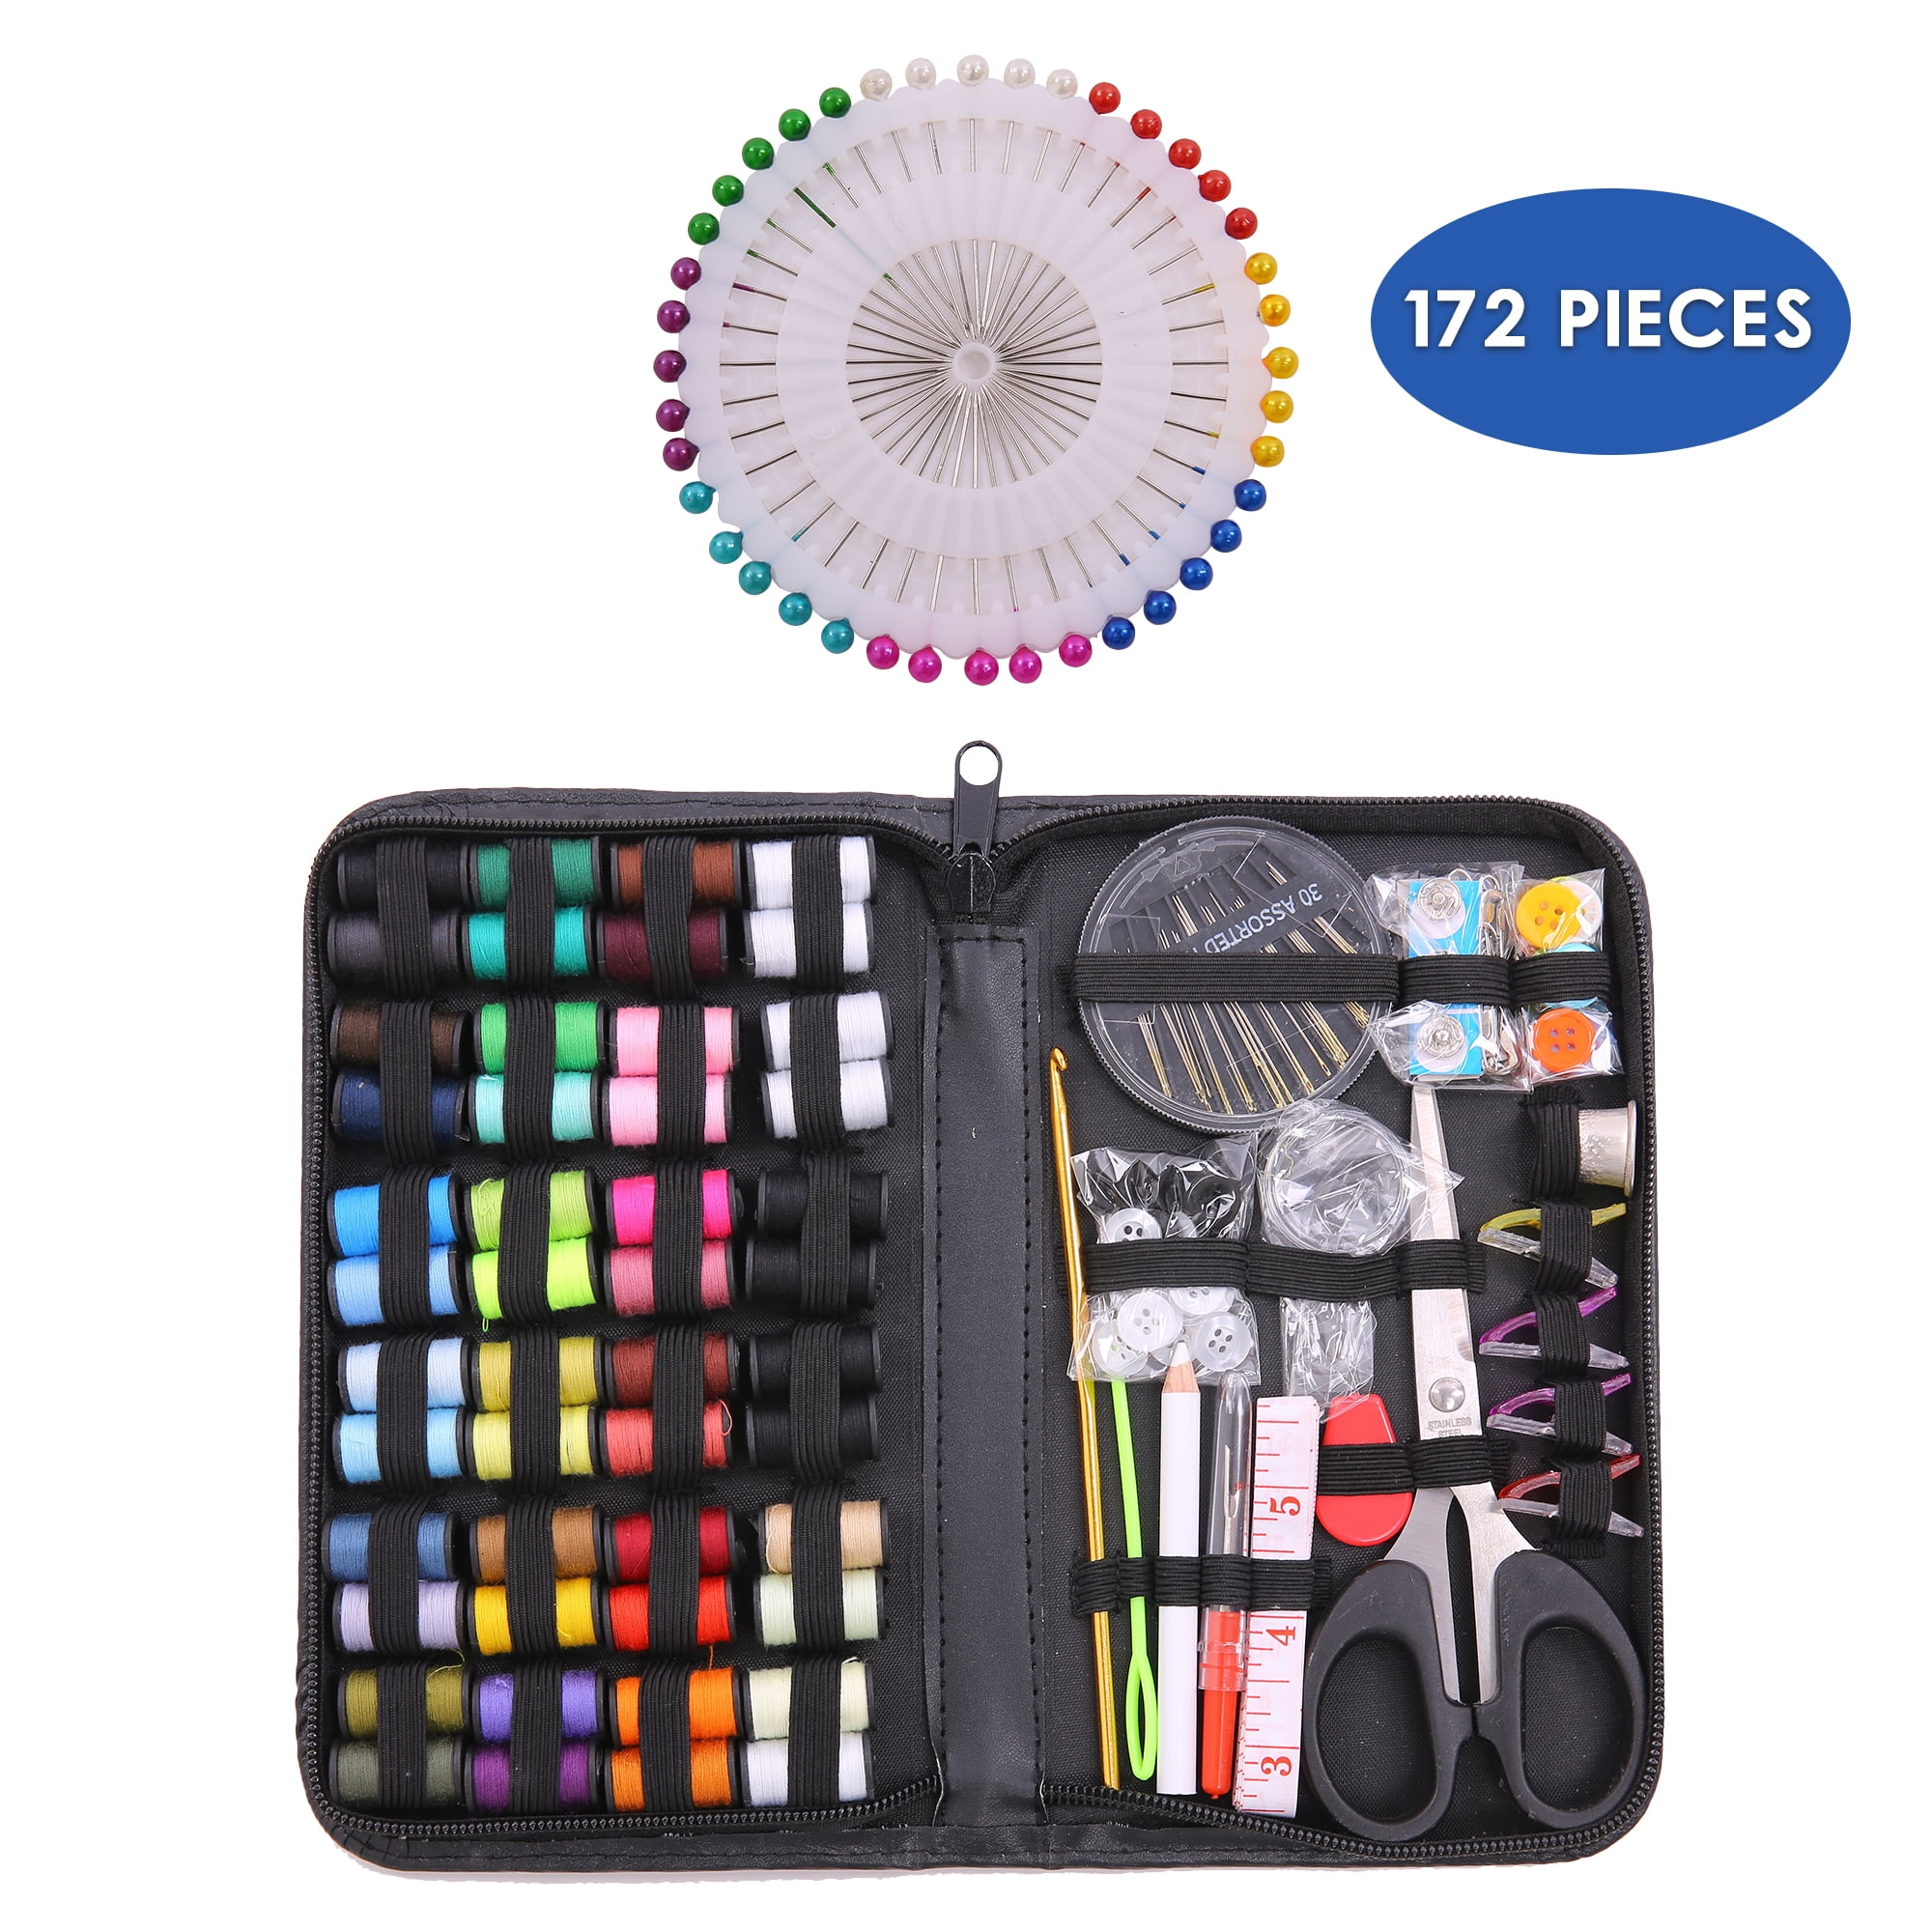  Brasenia Portable Sewing Kit with Zipper Case - Sewing Supplies  for Adults, Women, Beginners,DIY Home, Travel Repairs - Includes 14 Colors  of Thread, Thimble, Sewing Needles etc. (23pcs/Set)